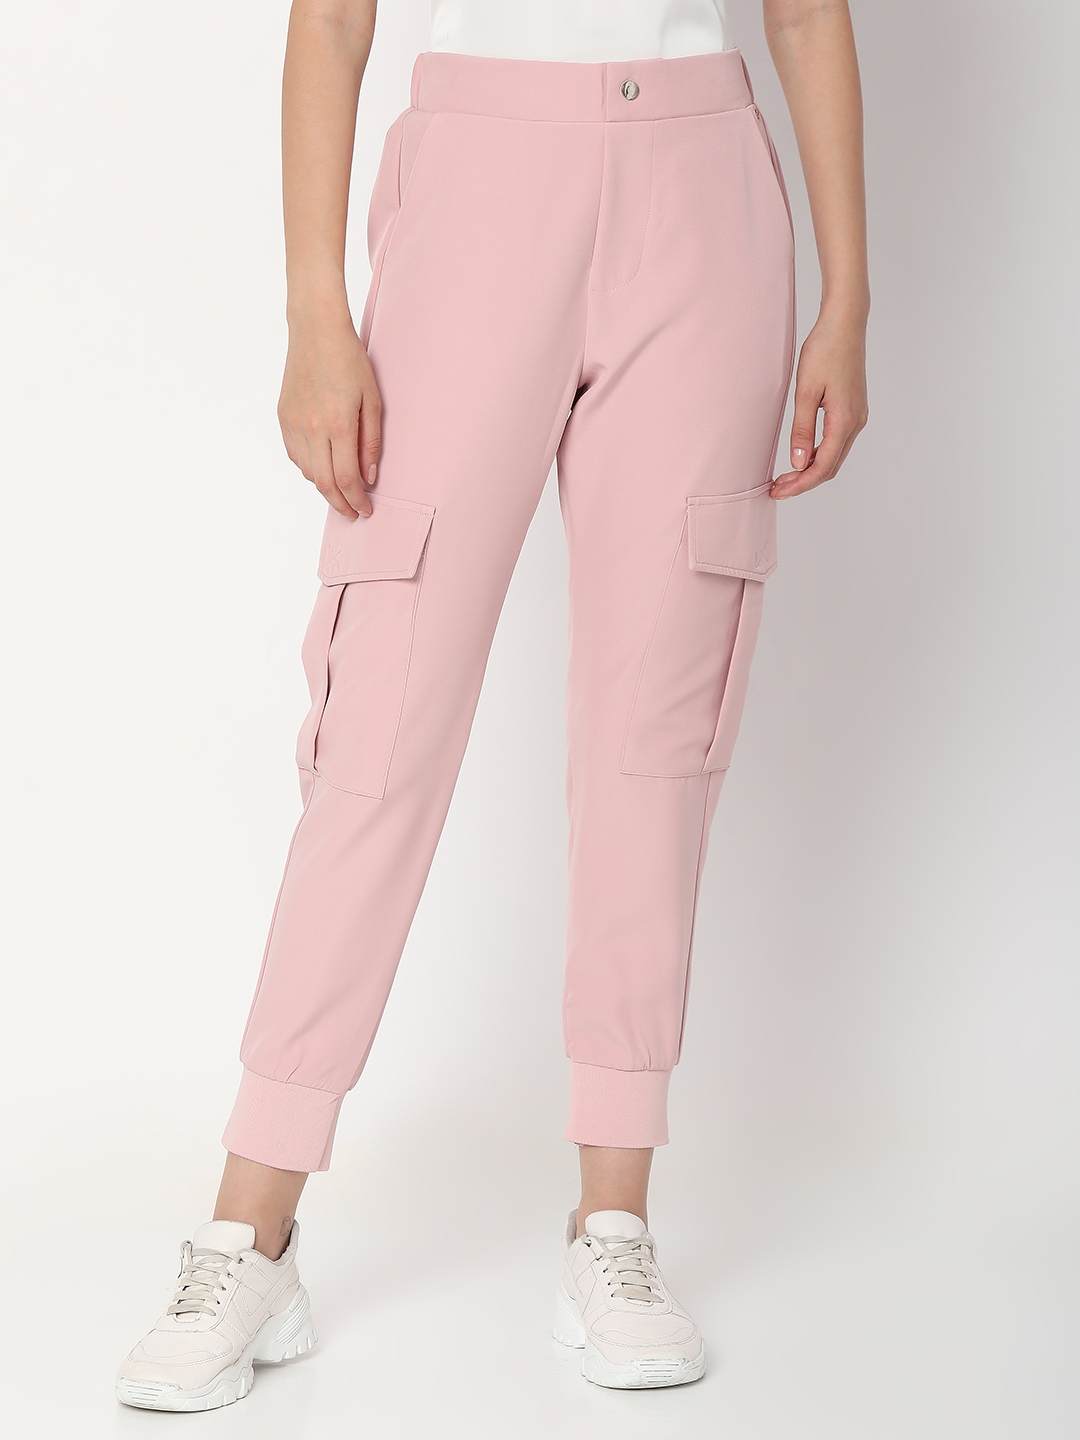 Women's Pink Cotton Solid Trackpants